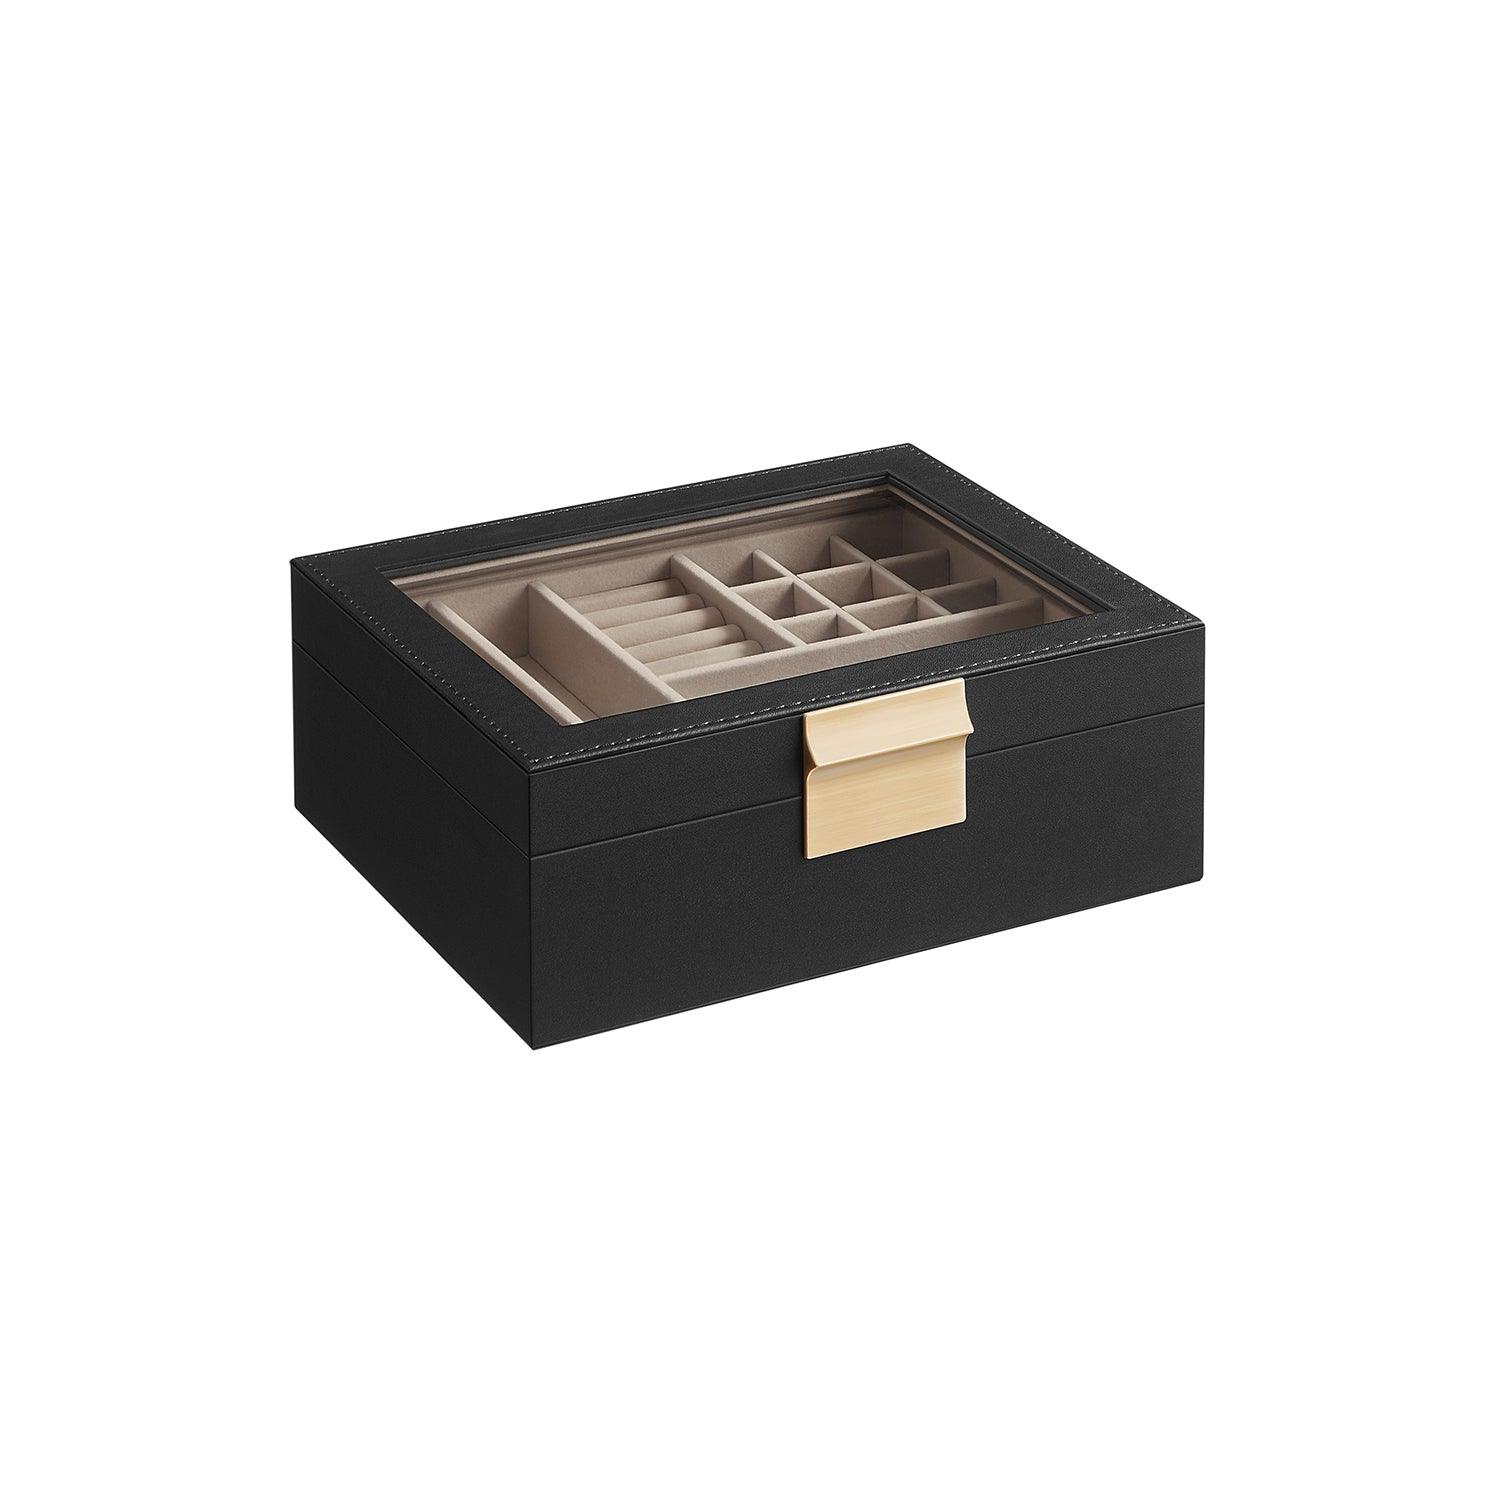 2-Layer Jewelry Box with Glass Lid Graphite Black and Metallic Gold FredCo